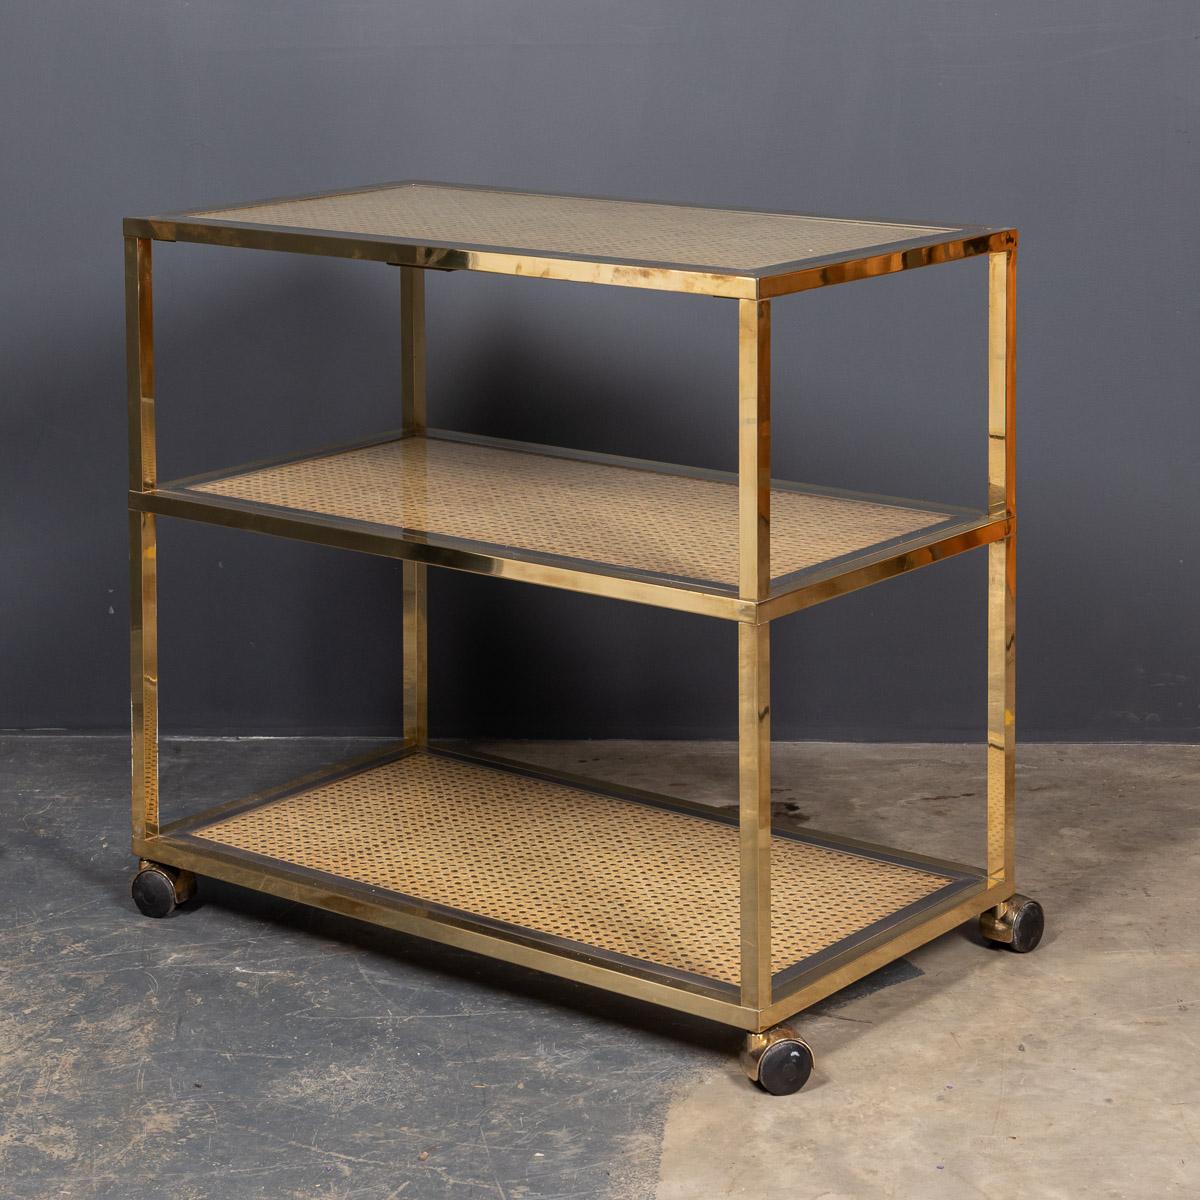 Stylish 20th century Italian three-tier brass and chrome drinks trolley with rattan and glass shelves. A must have for any sophisticated cocktail party.

Measures: Height 74cm
Width 80cm
Depth 45cm.